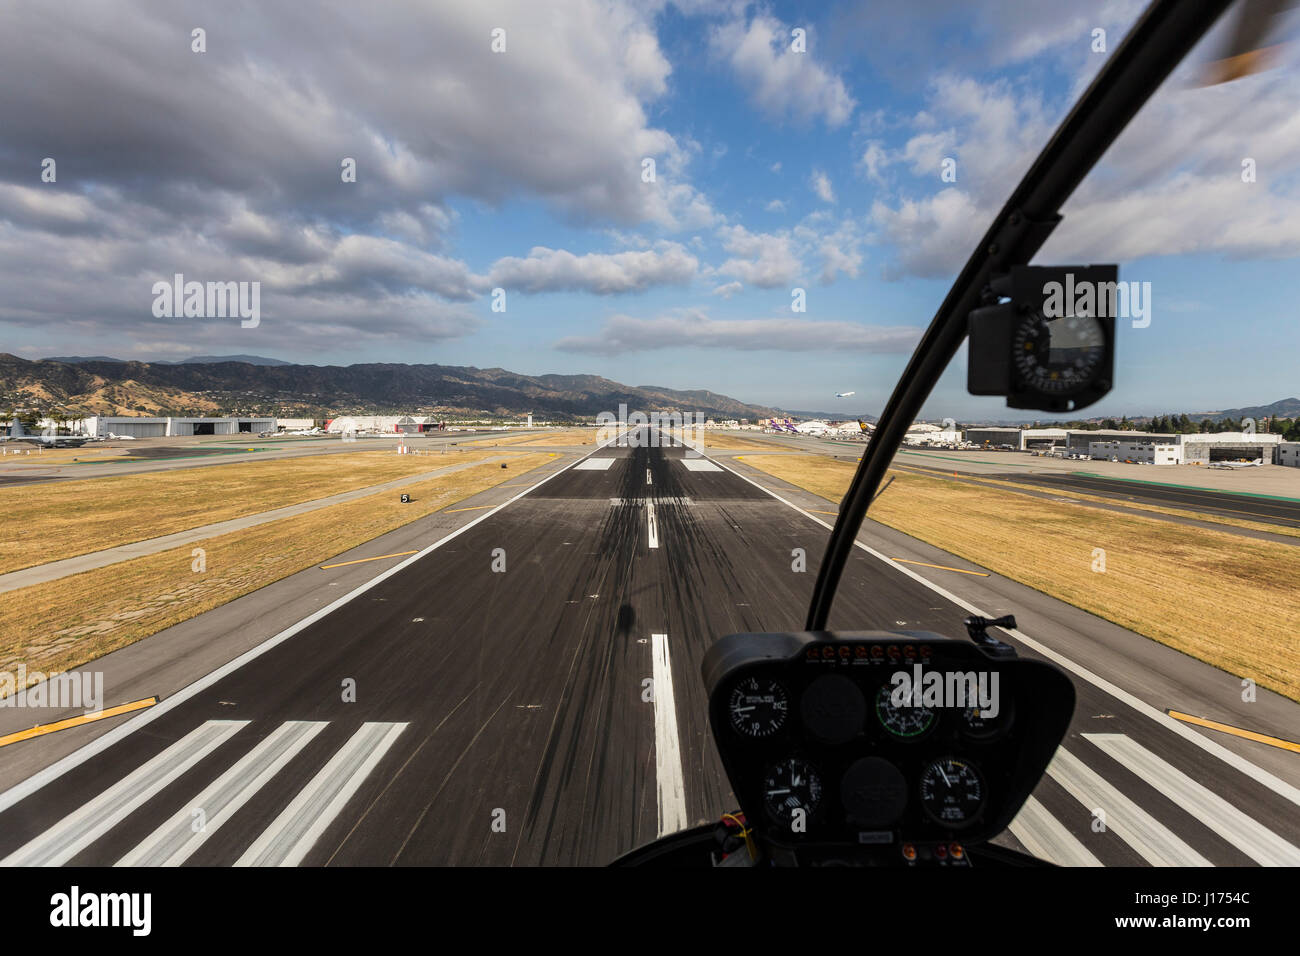 Burbank, California, USA - April 12, 2017:  Runway approach with afternoon clouds in Southern California. Stock Photo